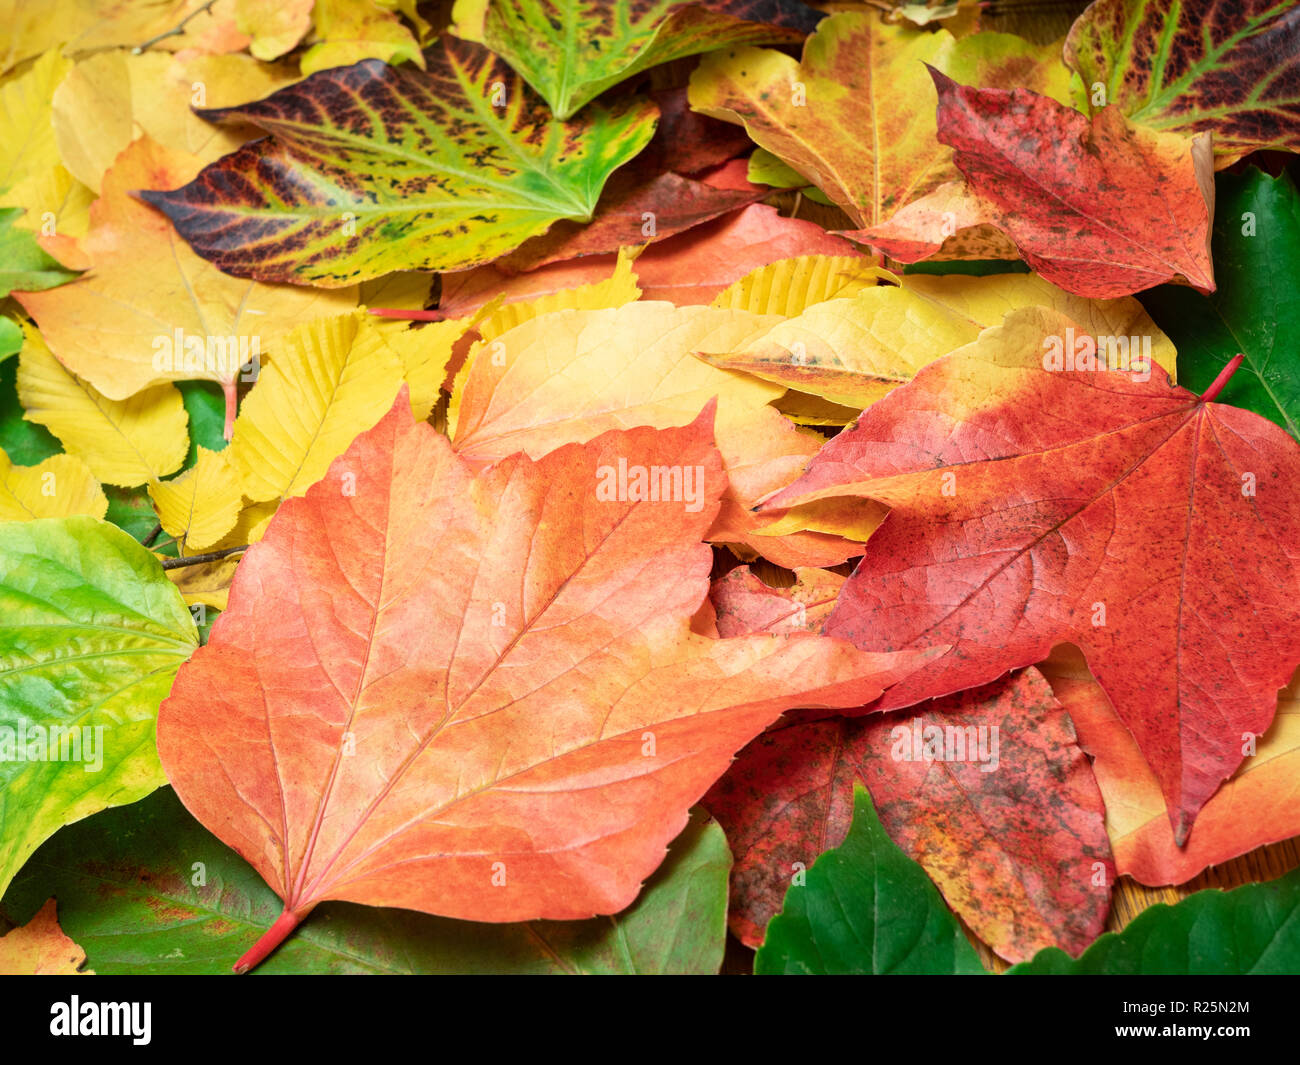 Leaves of all autumn colours (orange, red, yellow and green) are arranged on a table. Photographed indoors. Stock Photo